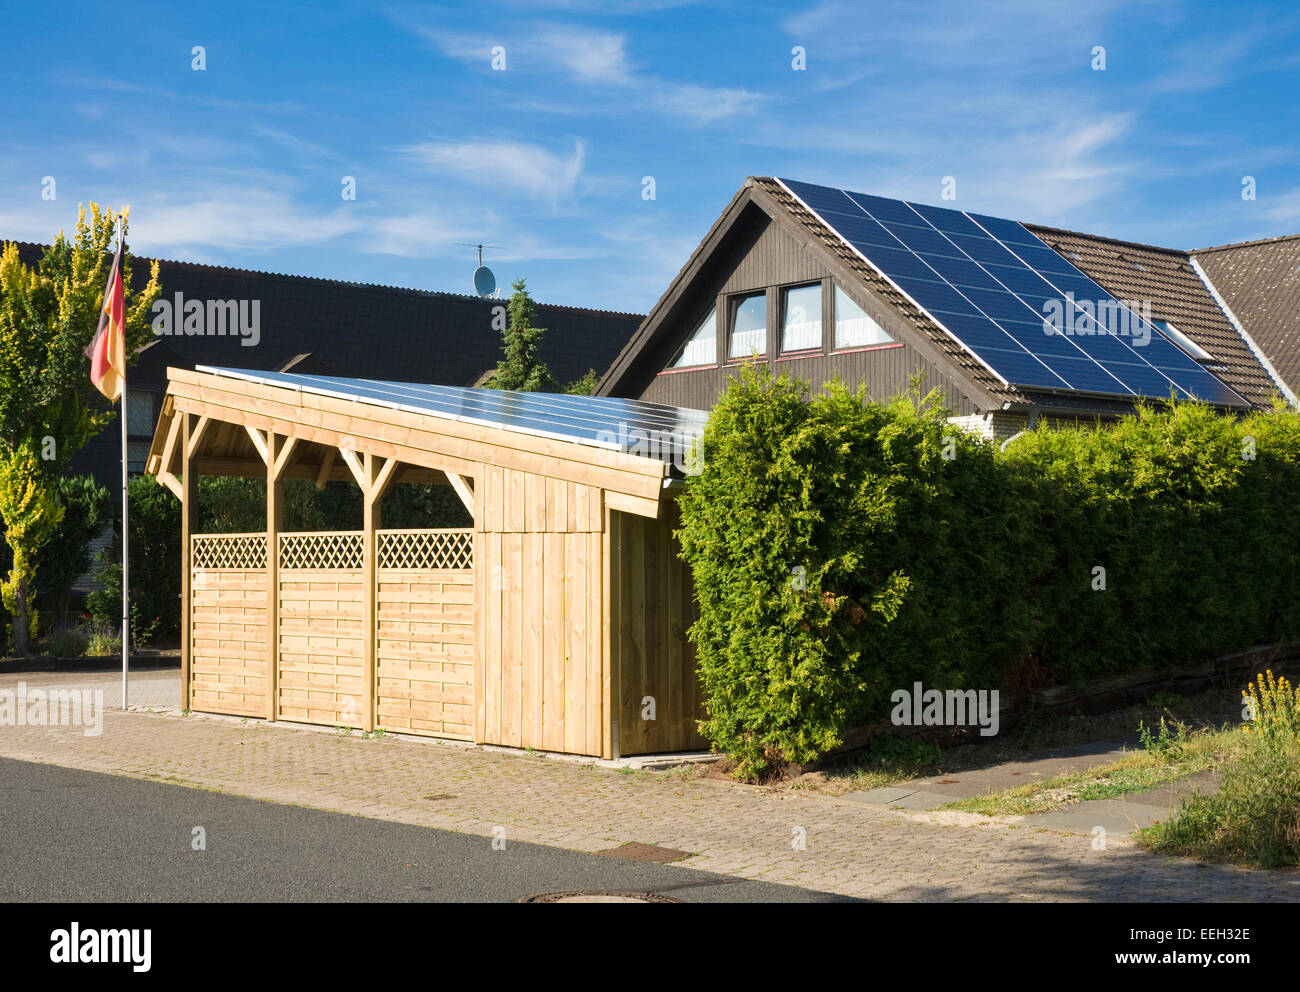 Solar Carport "Sunport" providing shelter and charging energy for two electric cars or plug-in hybrid like BMW i8,  e-Golf etc. Stock Photo